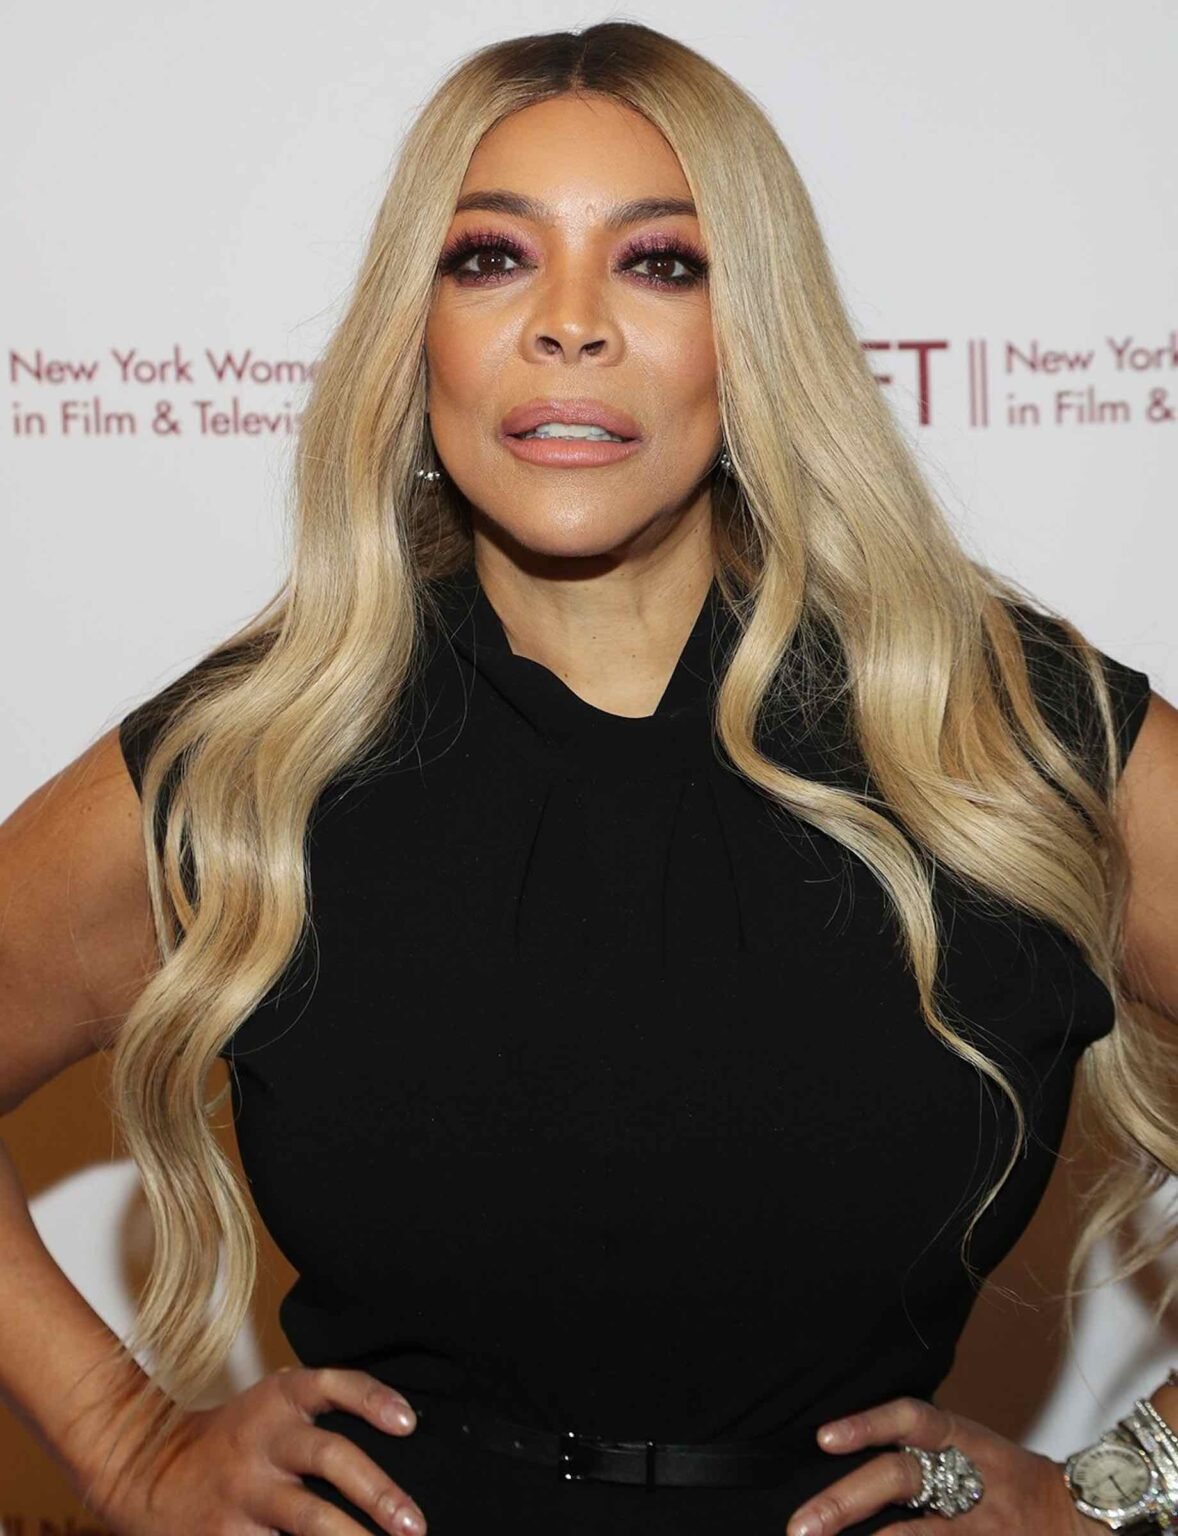 Wendy Williams is once again trending due to her treatment of young TikToker Swavy's death. Get ready to change the channel and dive into these reactions.